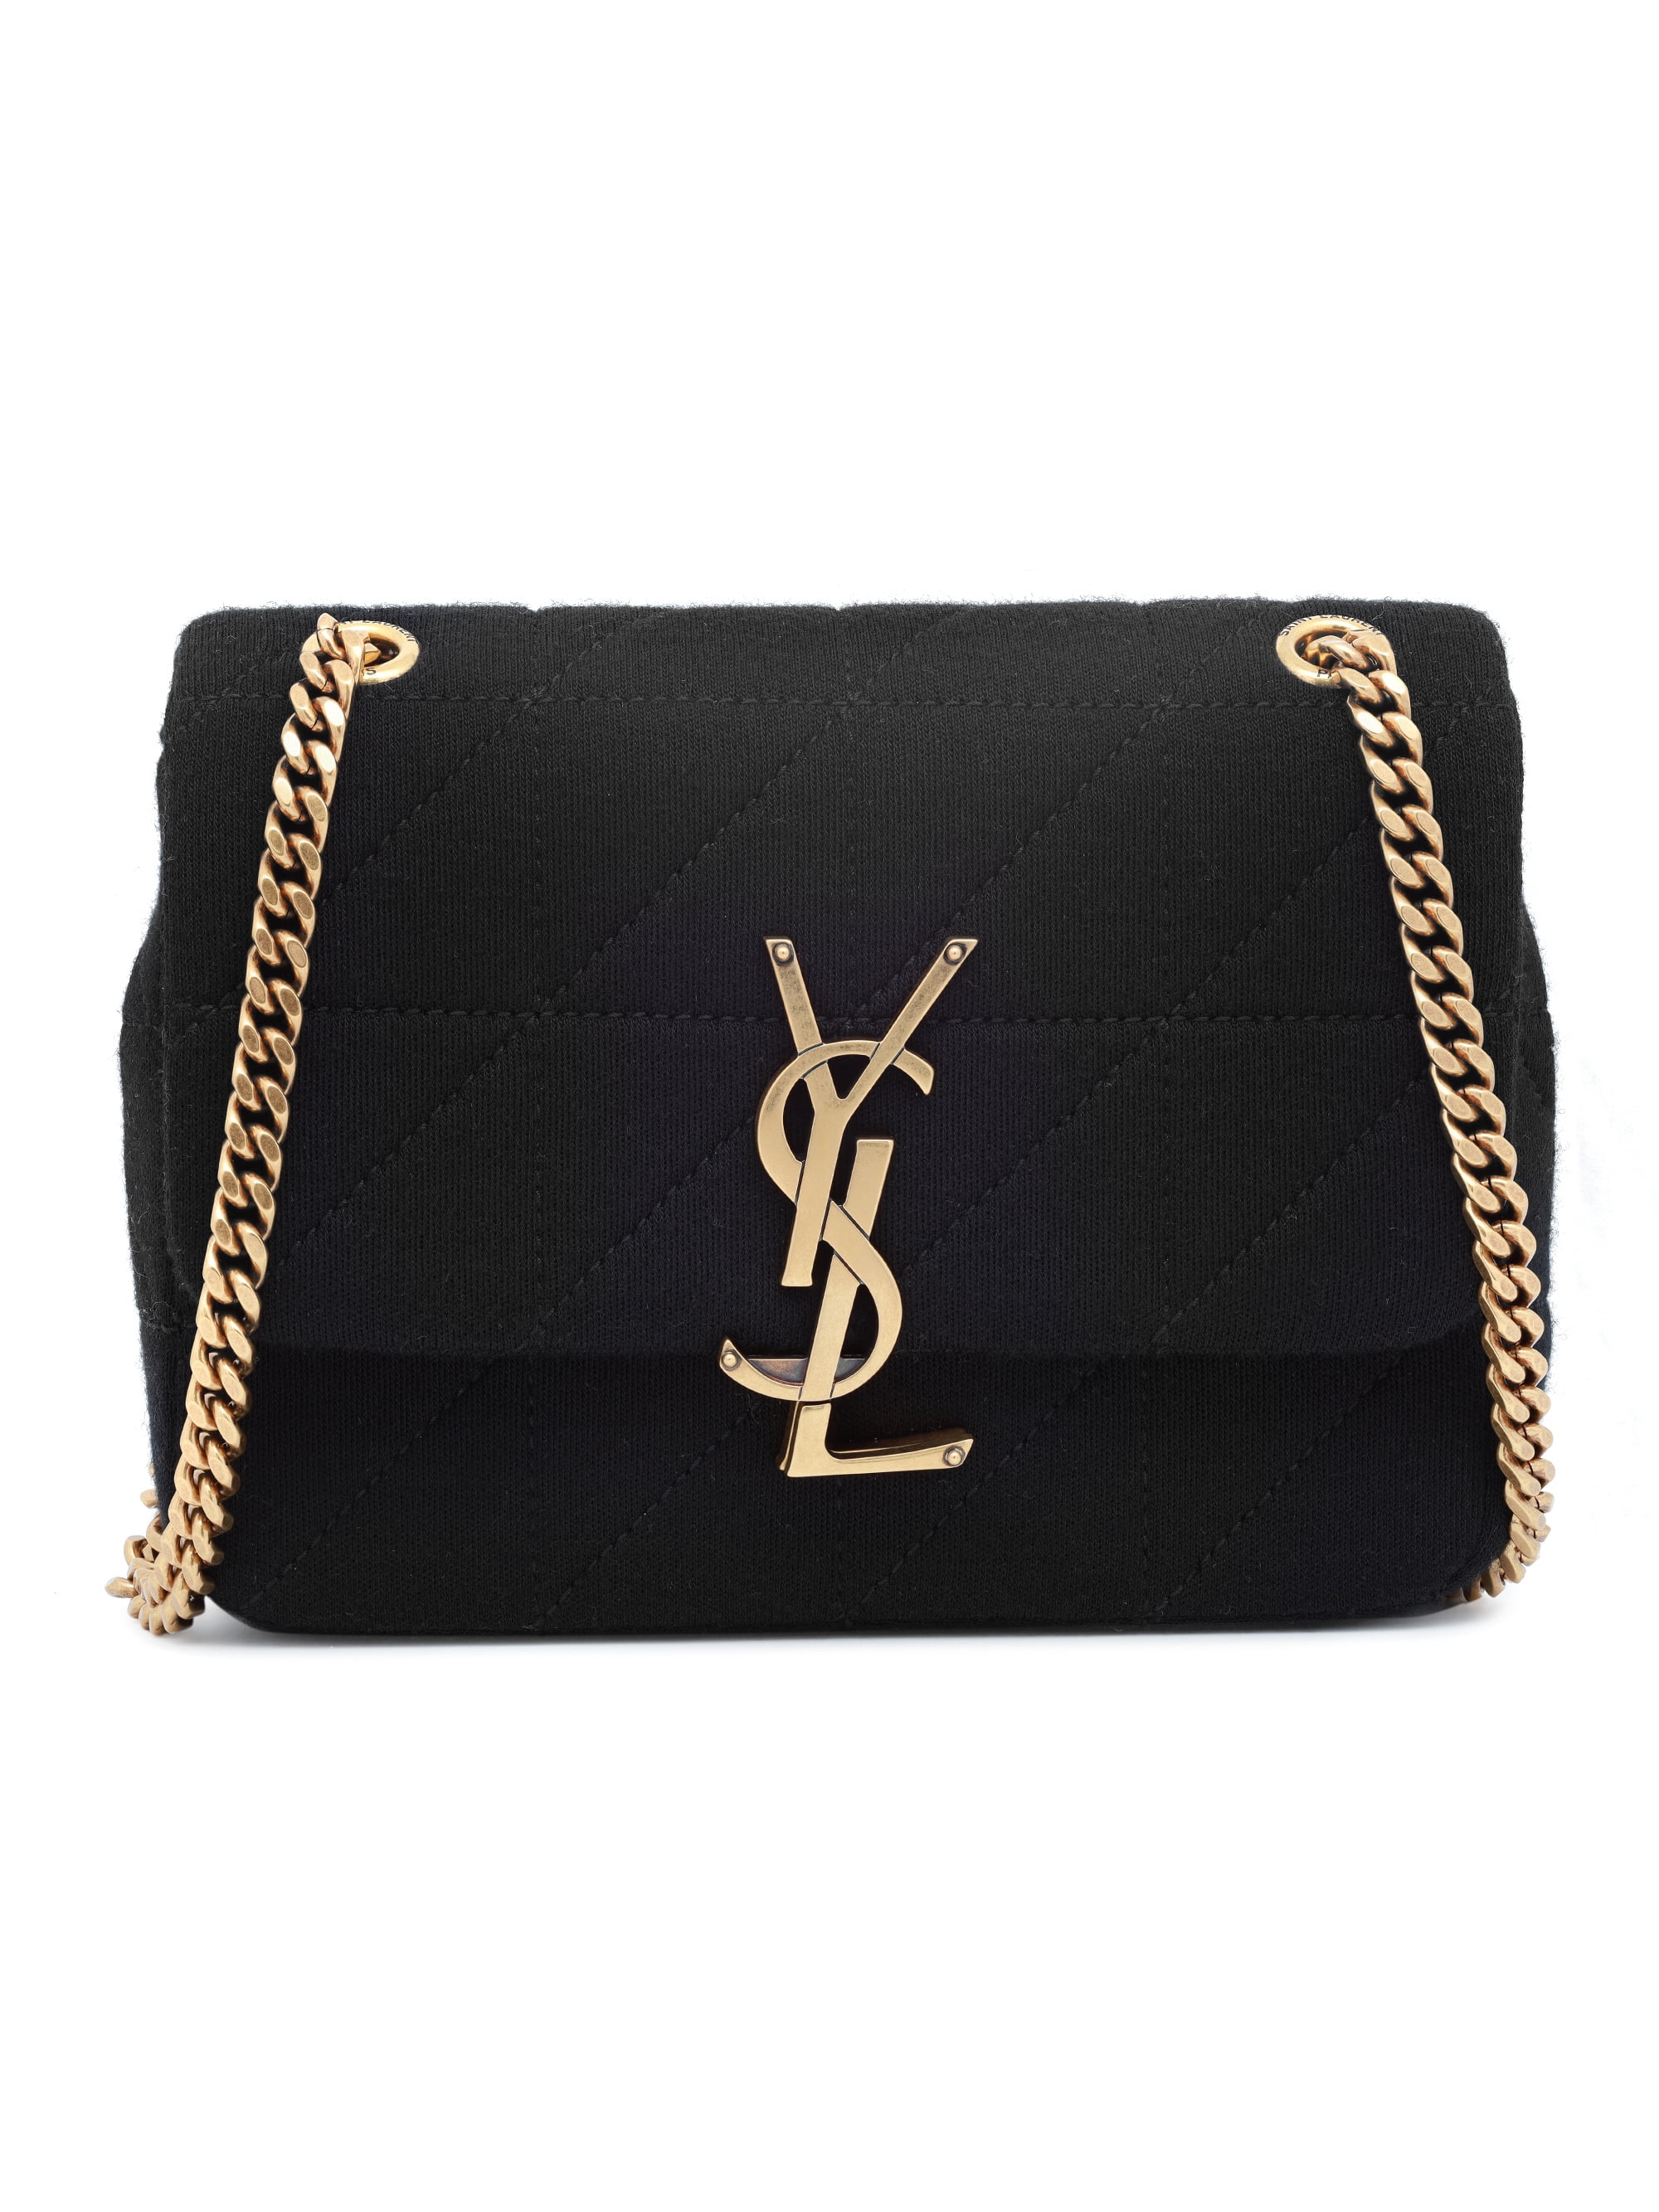 YVES SAINT LAURENT Sade Large Quilted Leather Clutch Bag Black